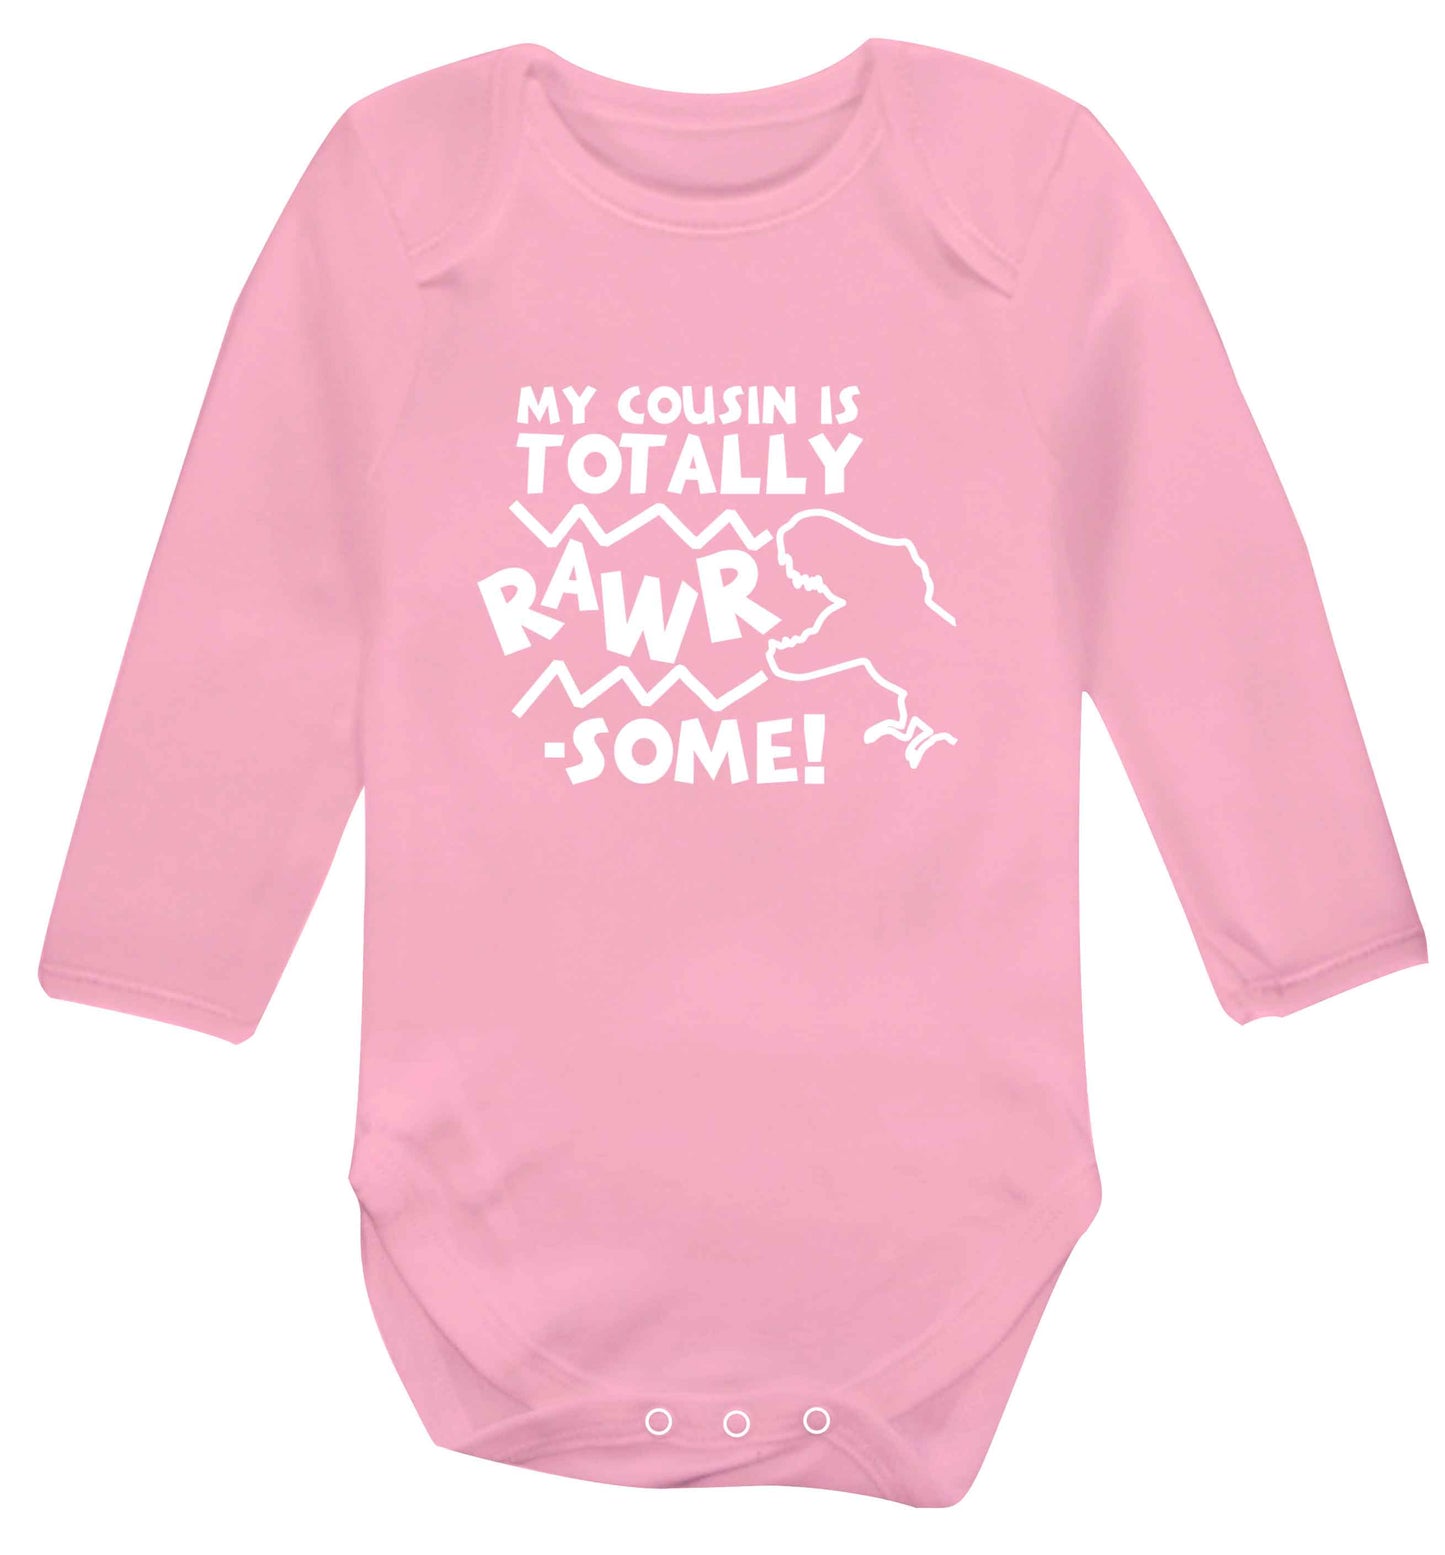 My cousin is totally rawrsome baby vest long sleeved pale pink 6-12 months